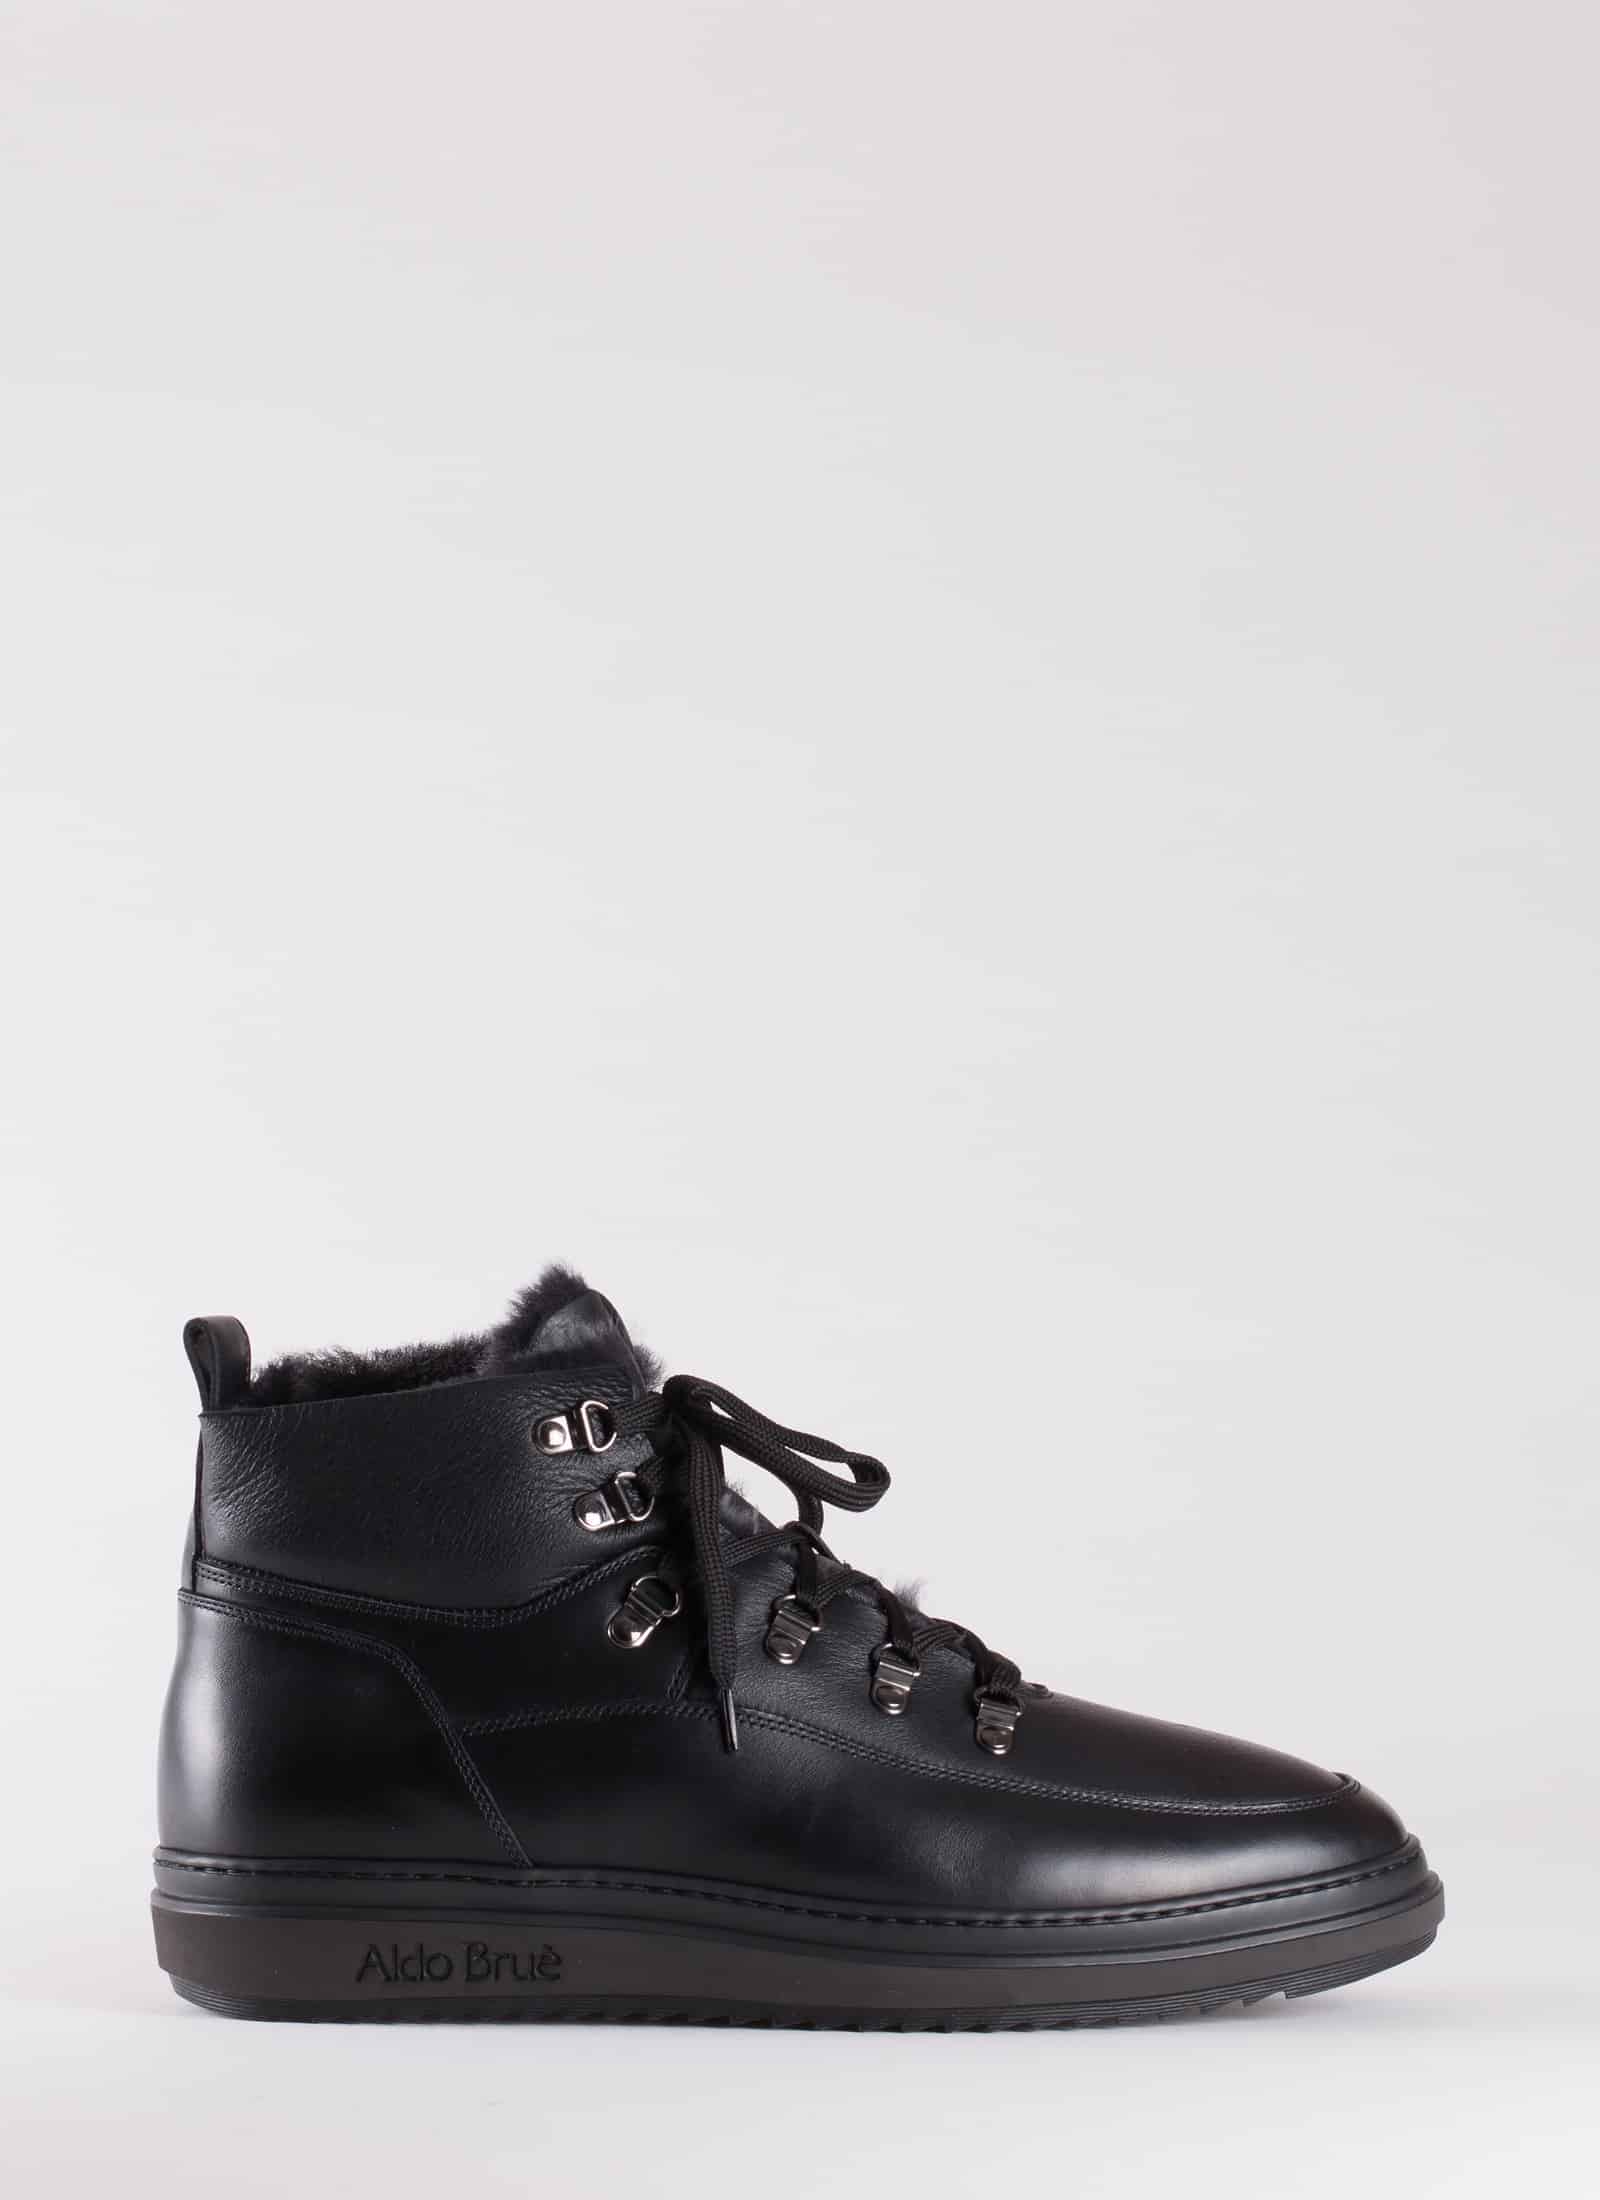 LEATHER HIGH SNEAKERS WITH FUR - ALDO BRUE